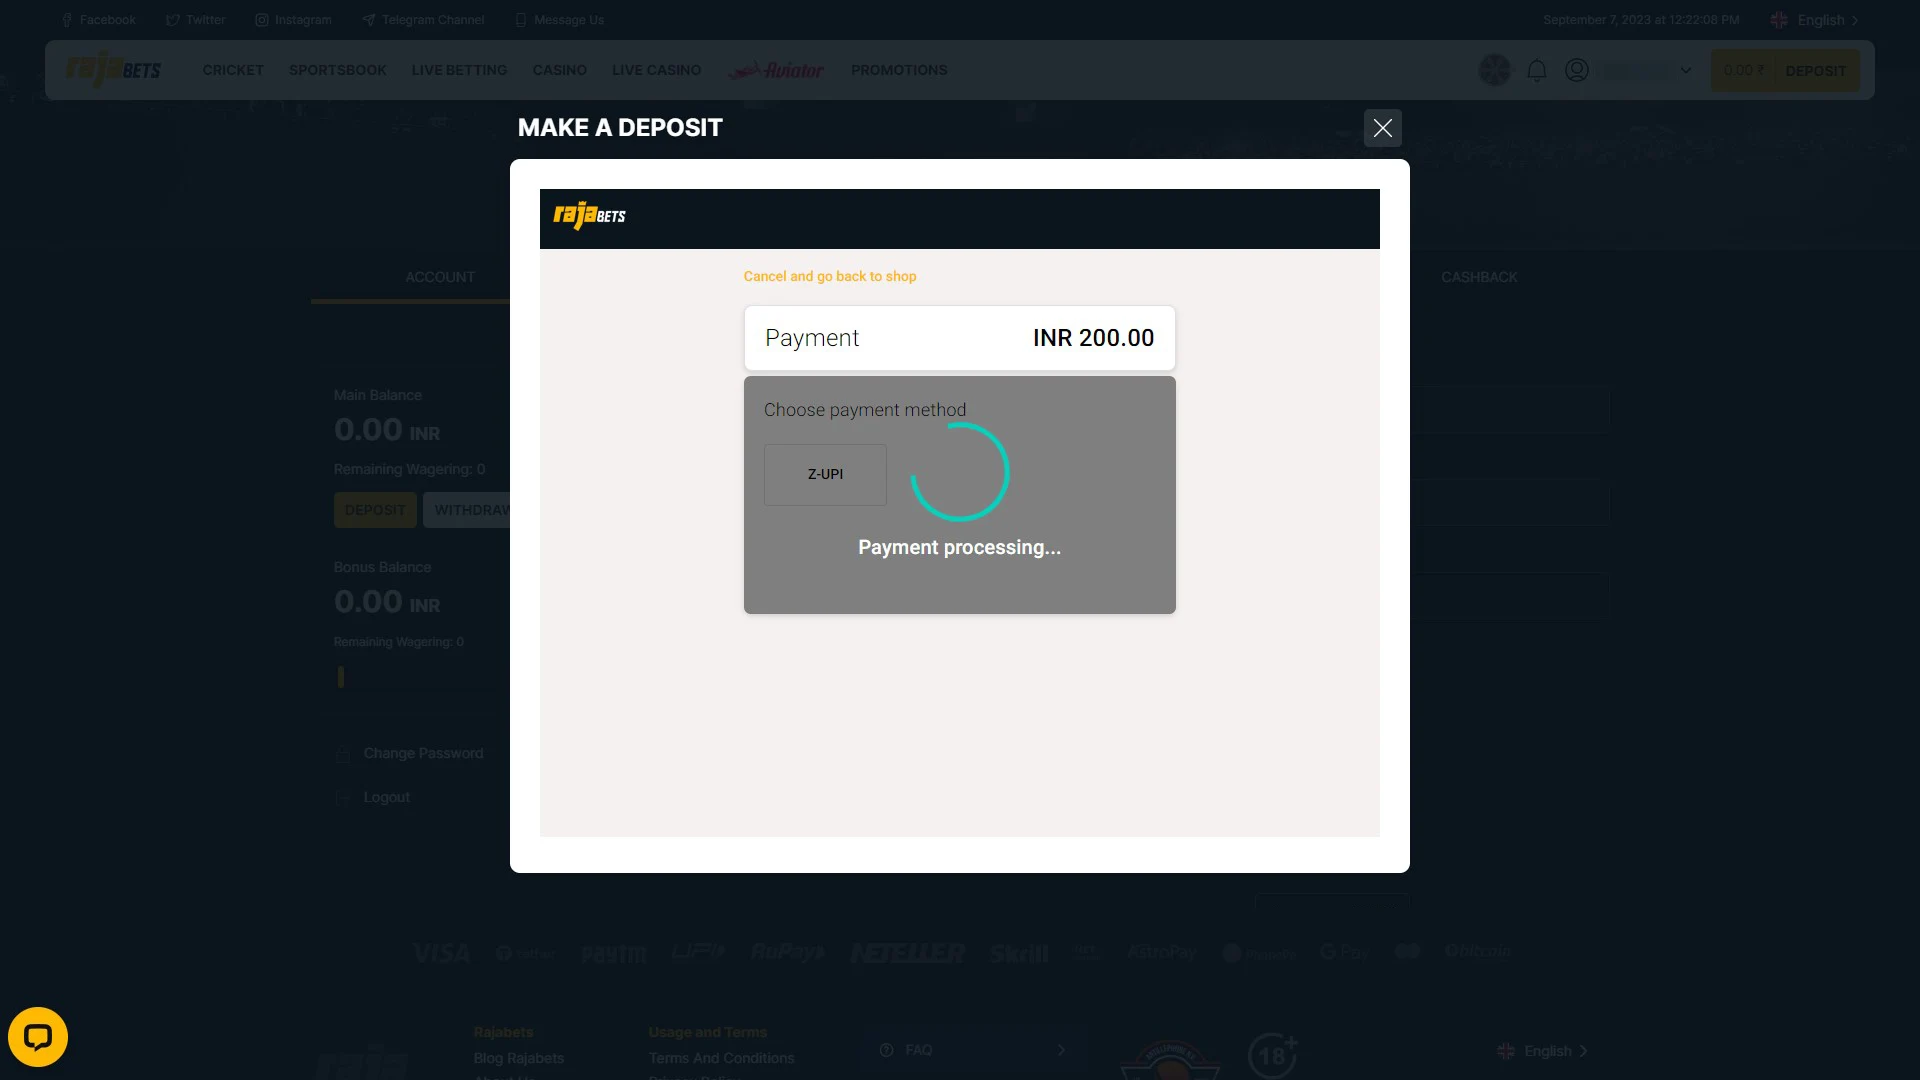 Enter the deposit amount and complete the transaction. 